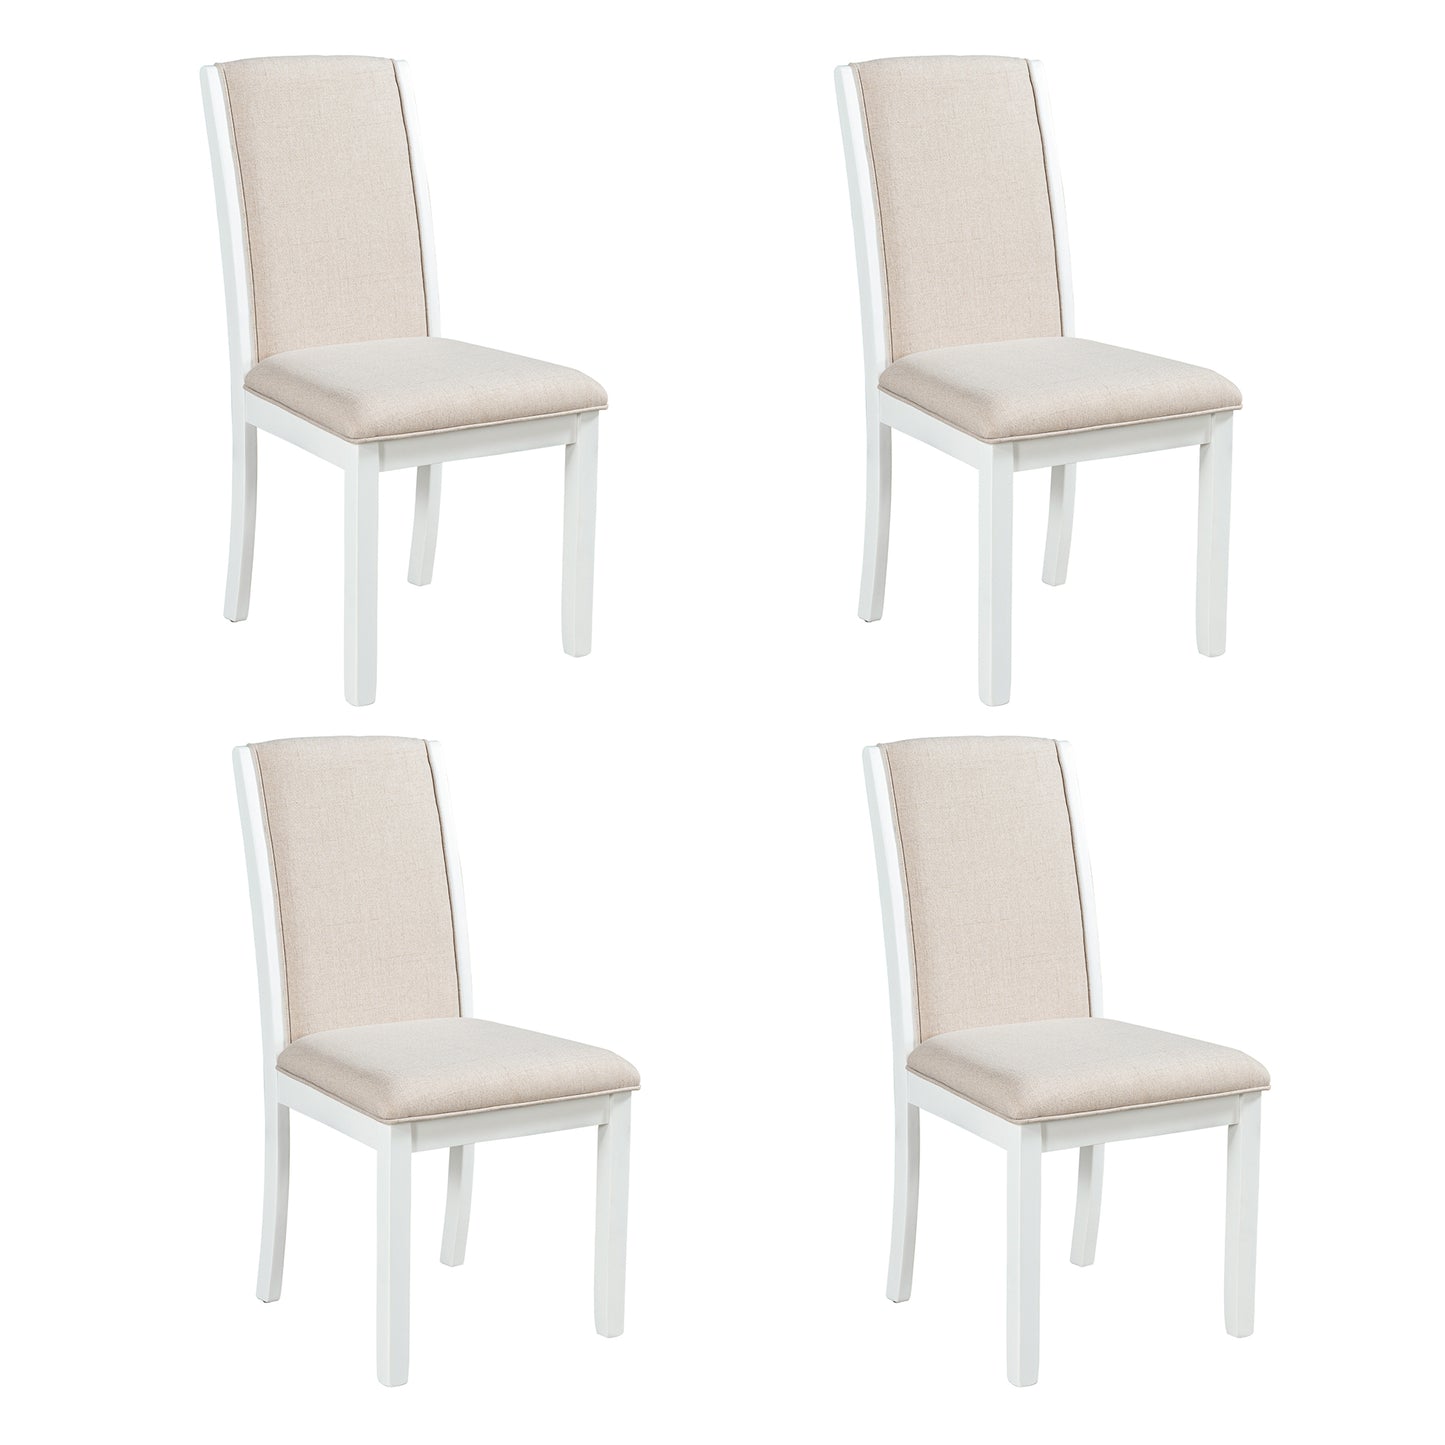 Montes Farmhouse 4-Piece Wood Full Back Dining Chairs Set